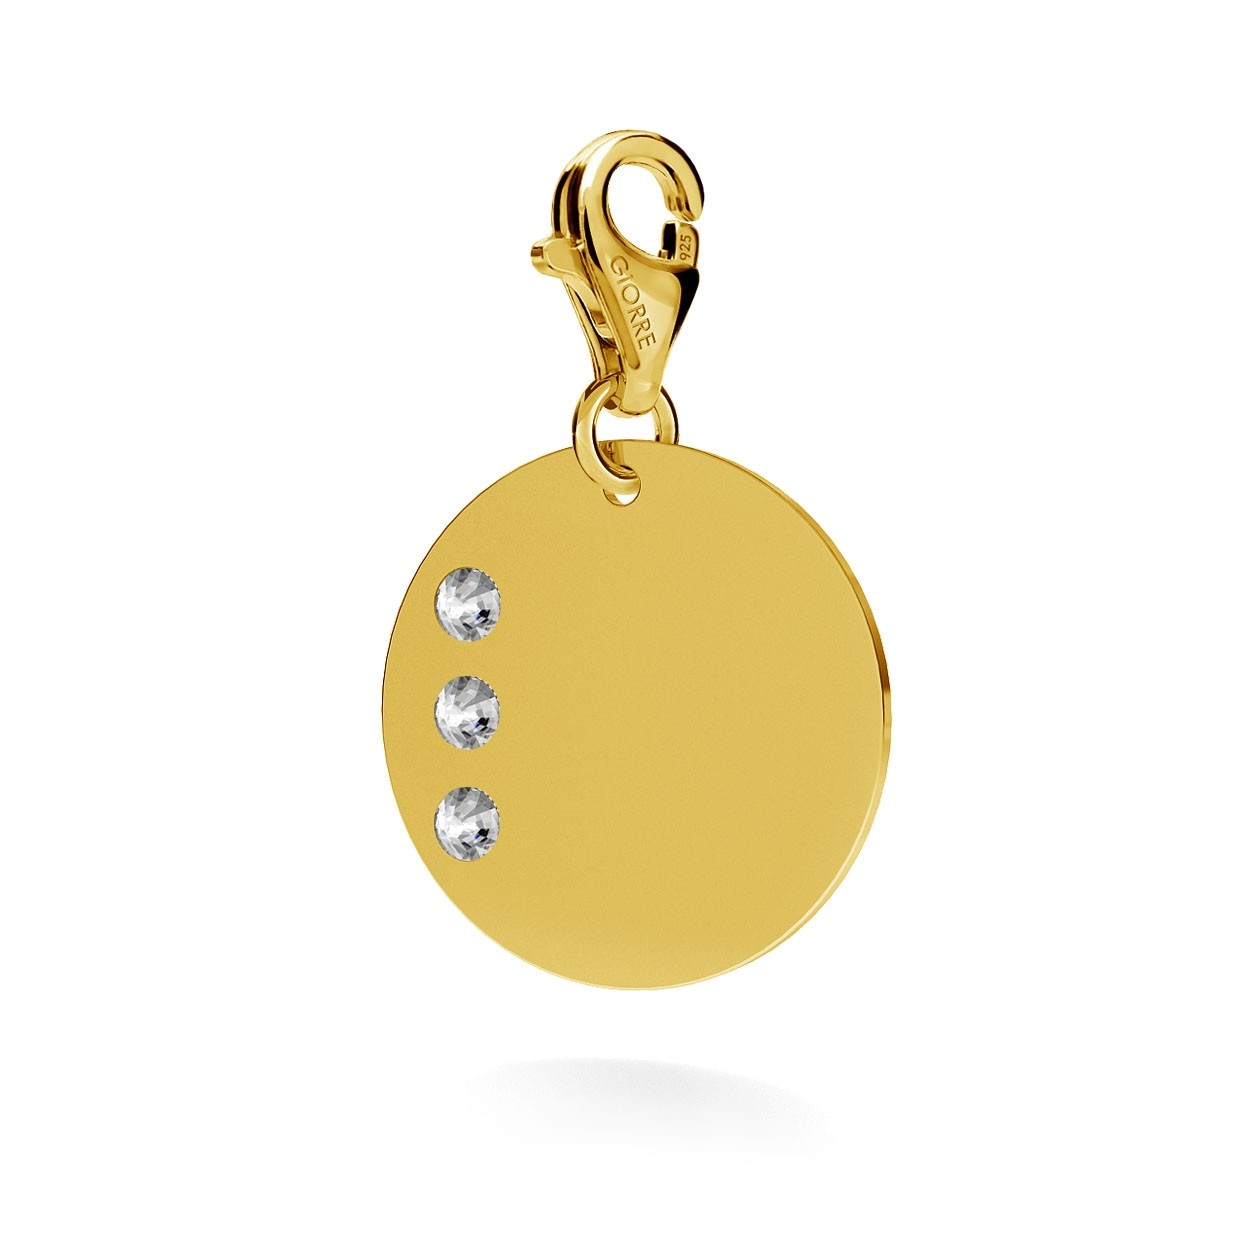 CHARM 131, ROUND DISC NAME WITH ENGRAVE, SWAROVSKI 2038 SS 6, STERLING SILVER (925) RHODIUM OR GOLD PLATE